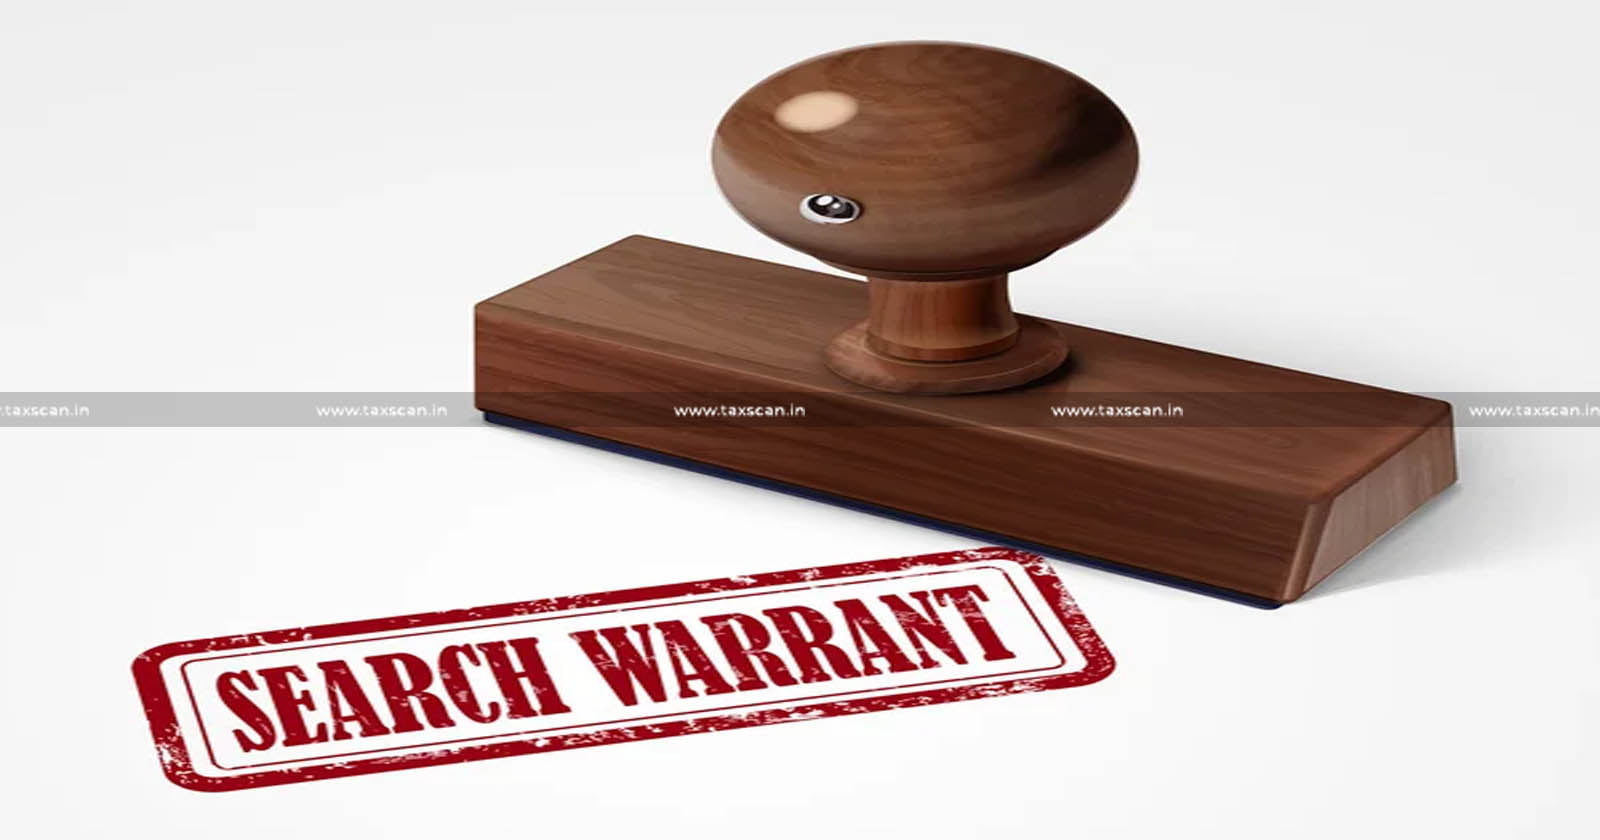 Search Warrant - Orissa High Court - Assessment - Income Tax Act - Income Tax - Tax - Taxscan